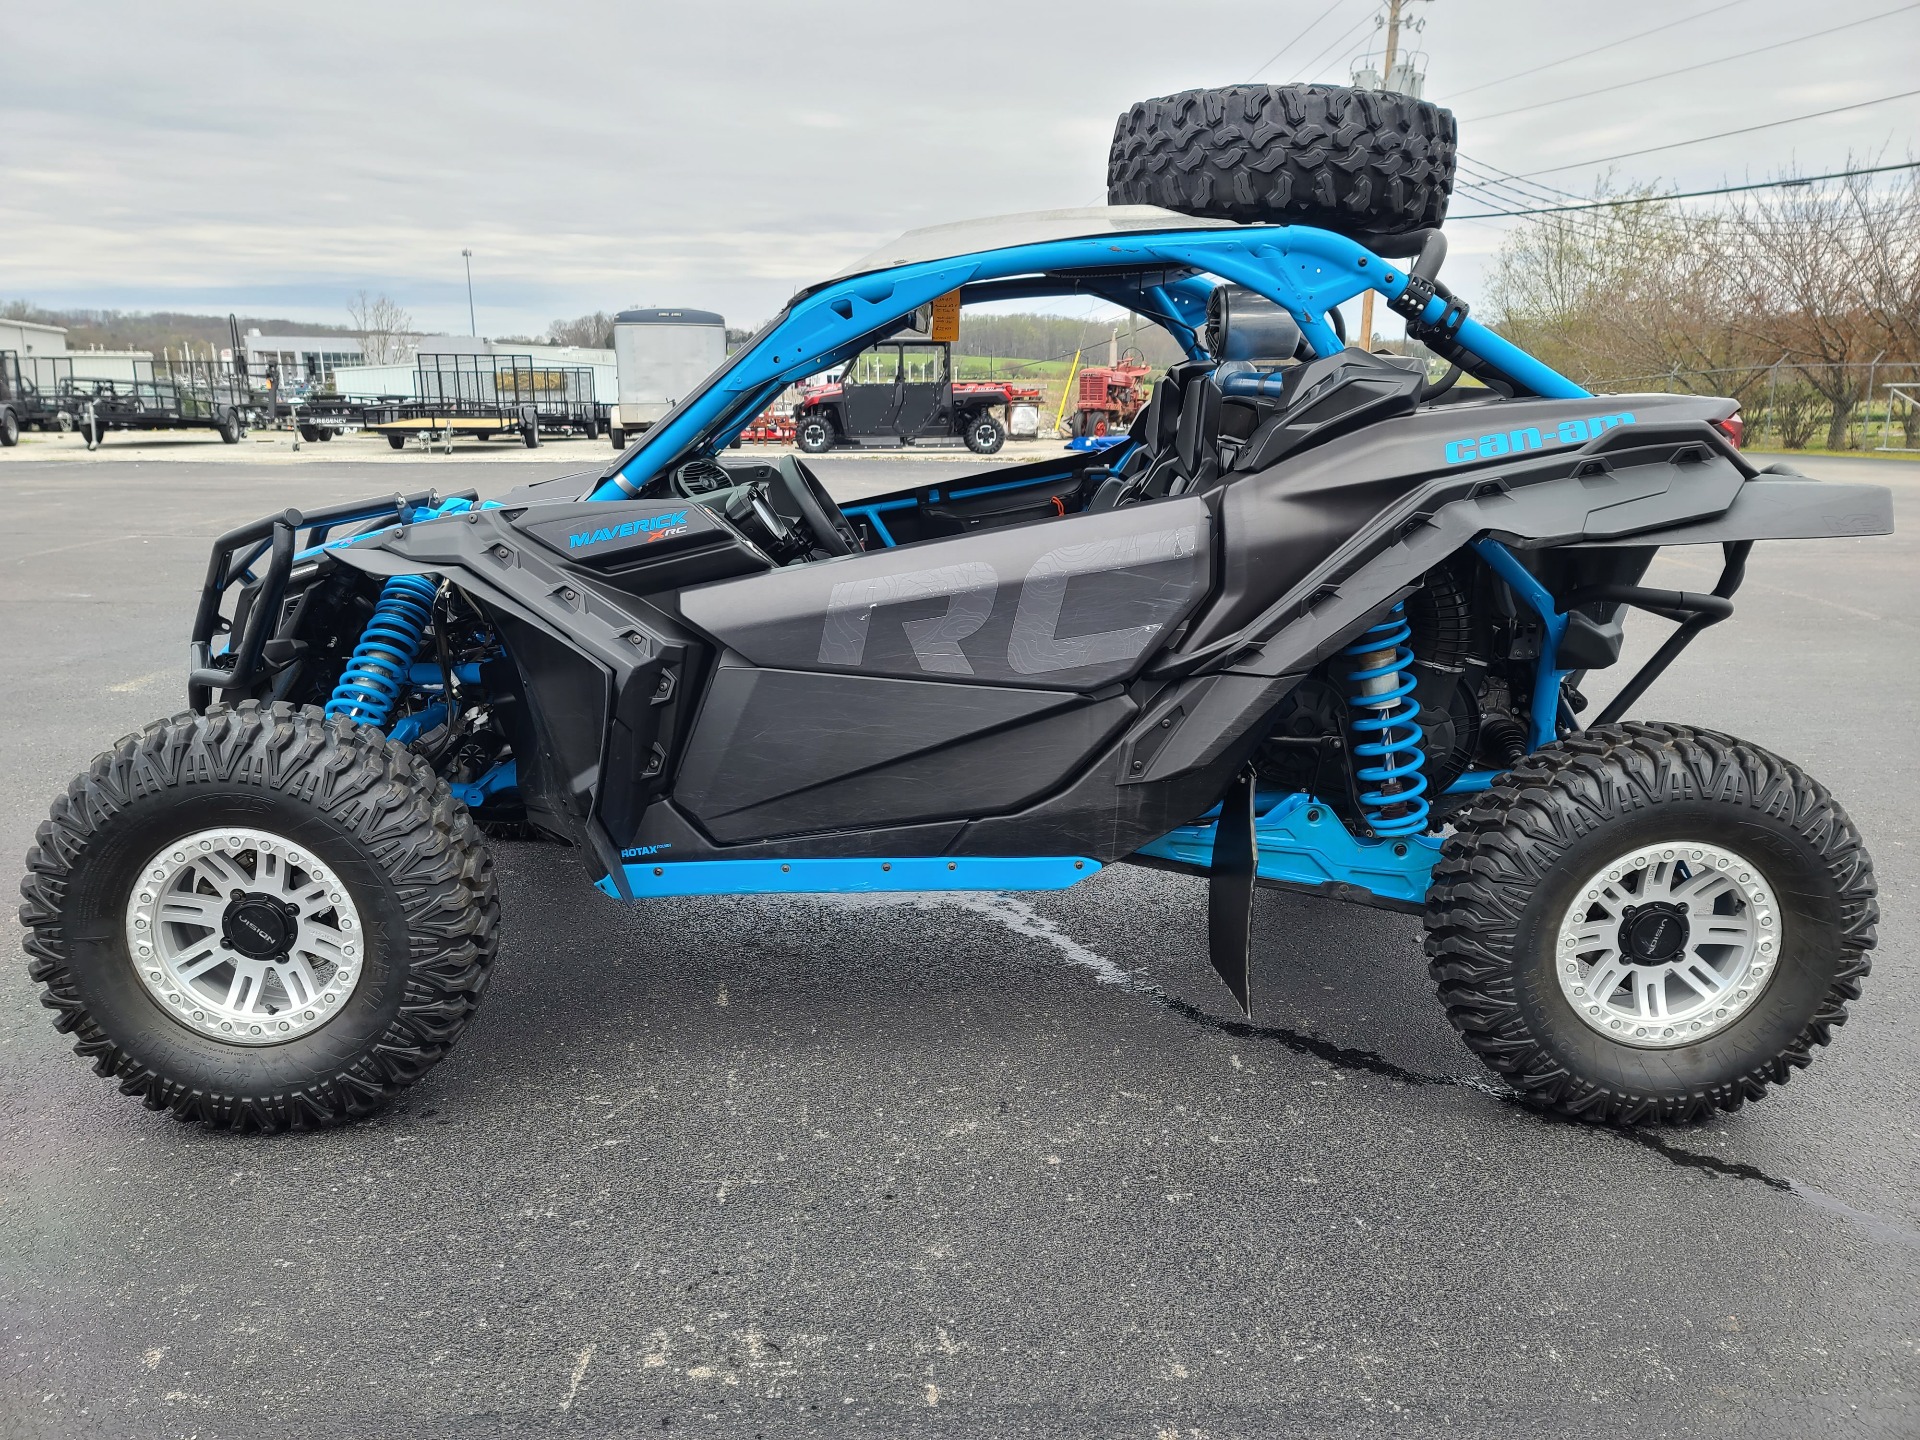 2019 Can-Am Maverick X3 X rc Turbo R in Clinton, Tennessee - Photo 5